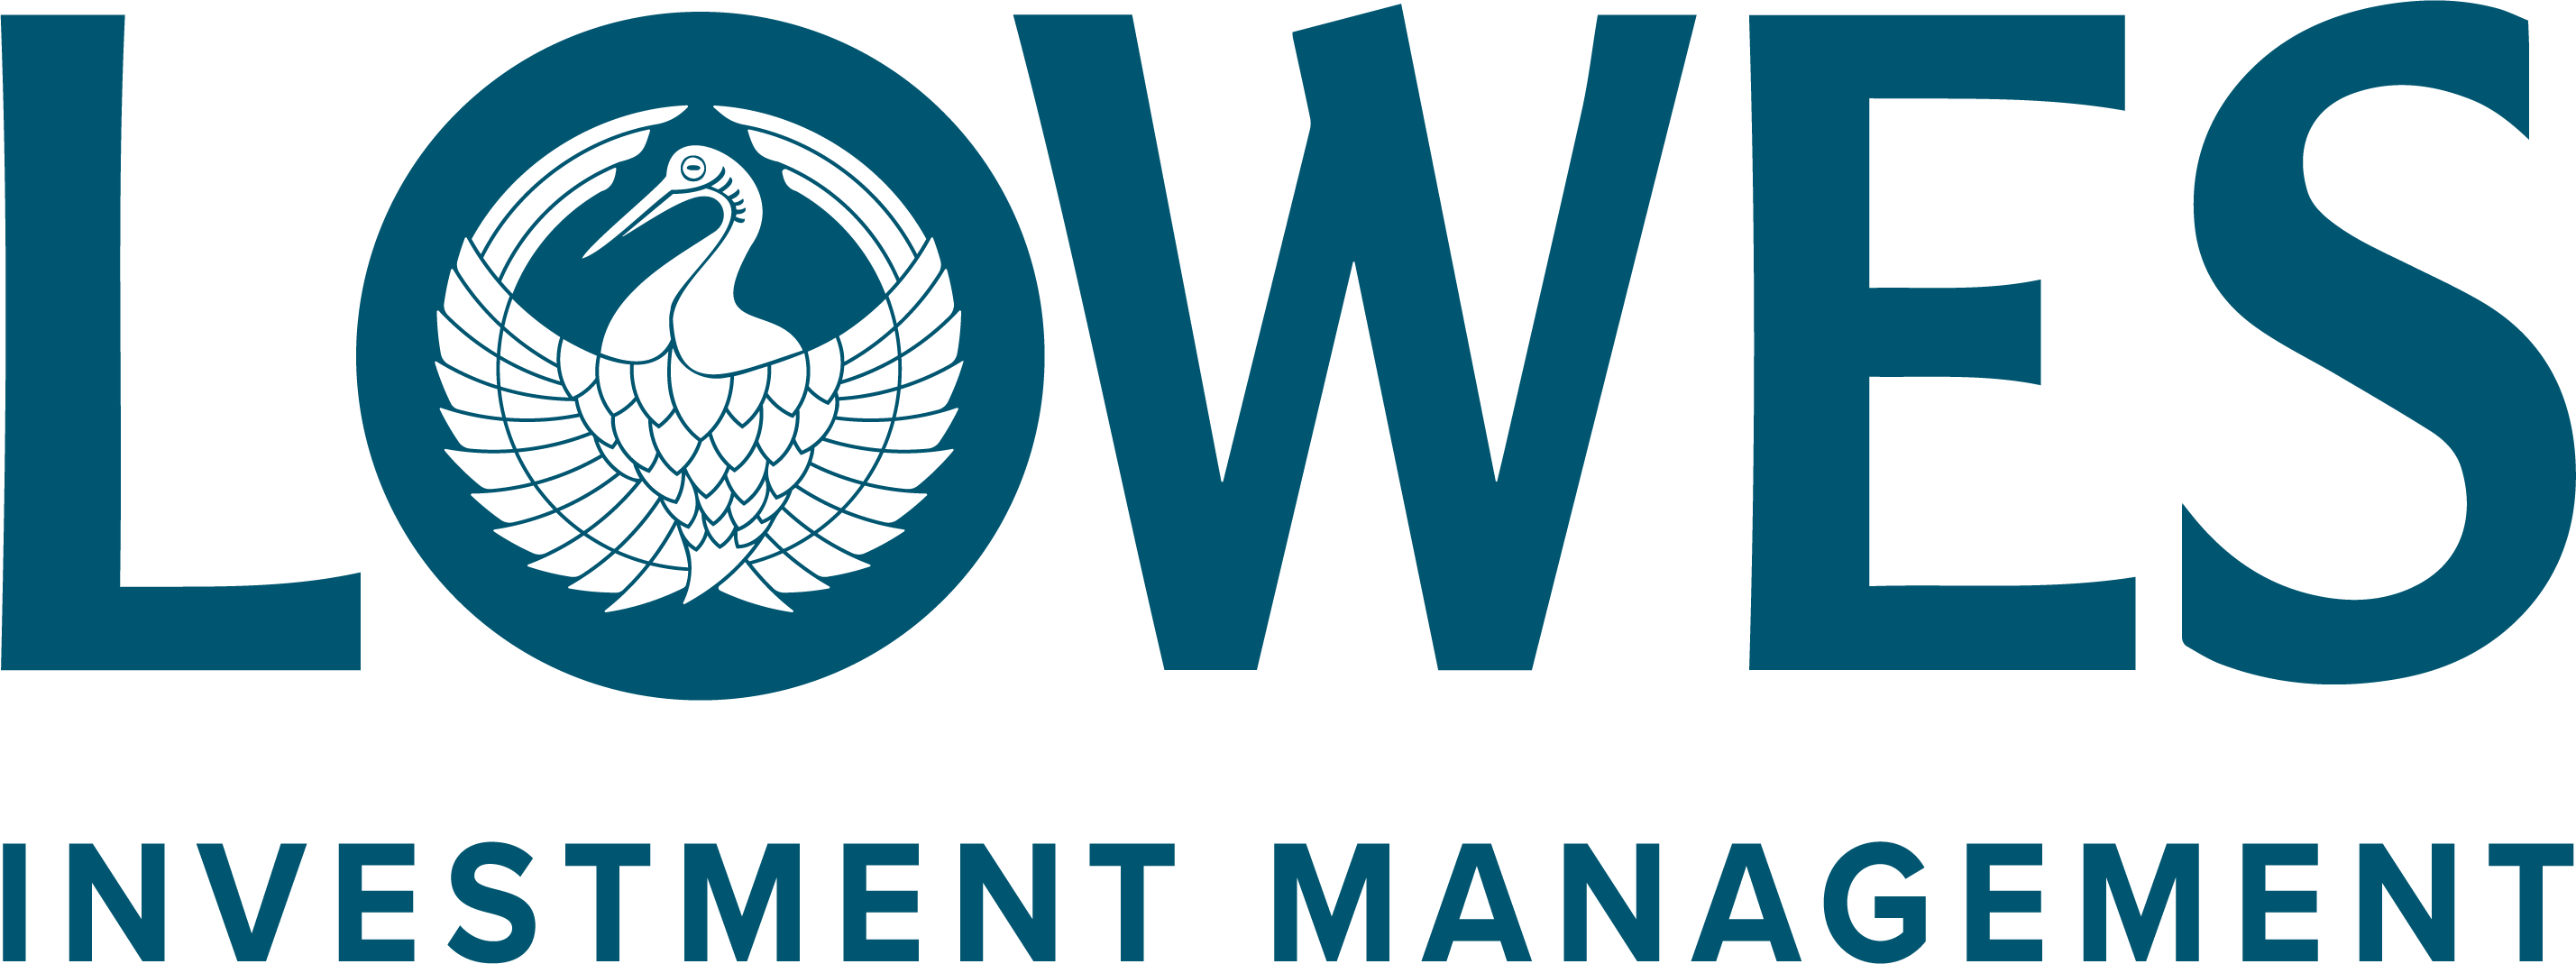 Lowes Investment Management